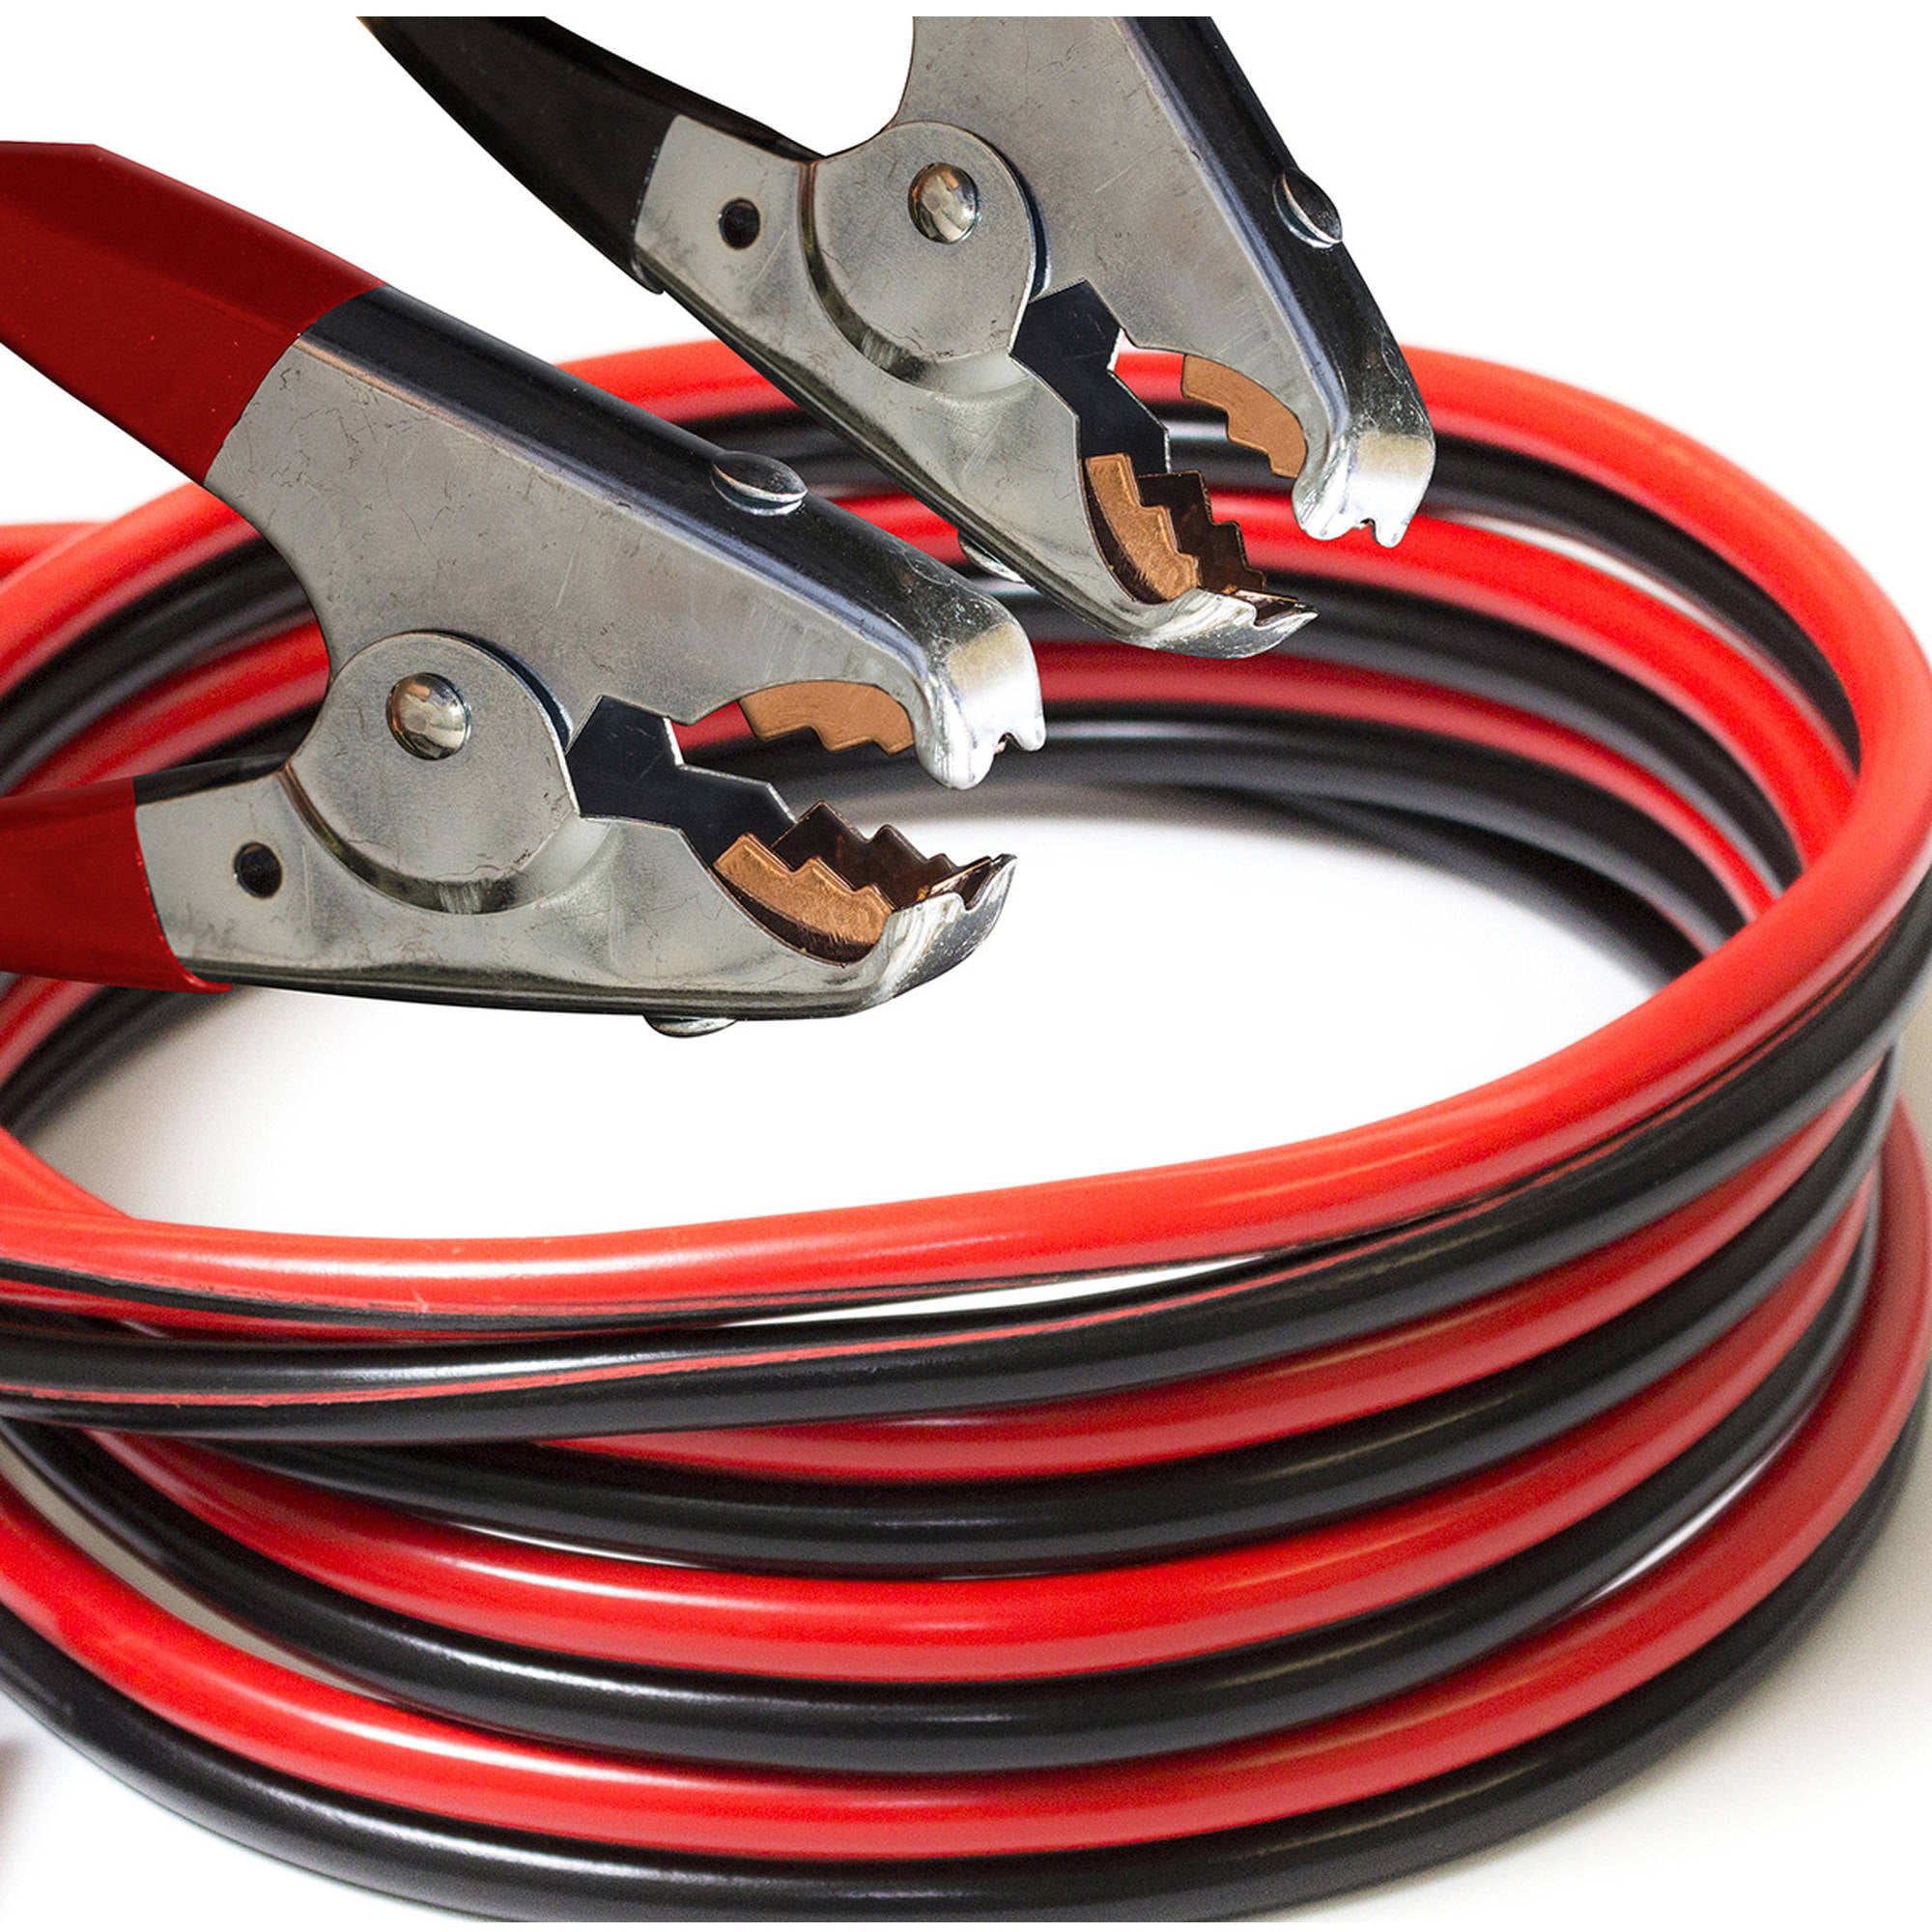 Sumex Jump Lead Booster Cables Professional Heavy Duty 500 Amp 